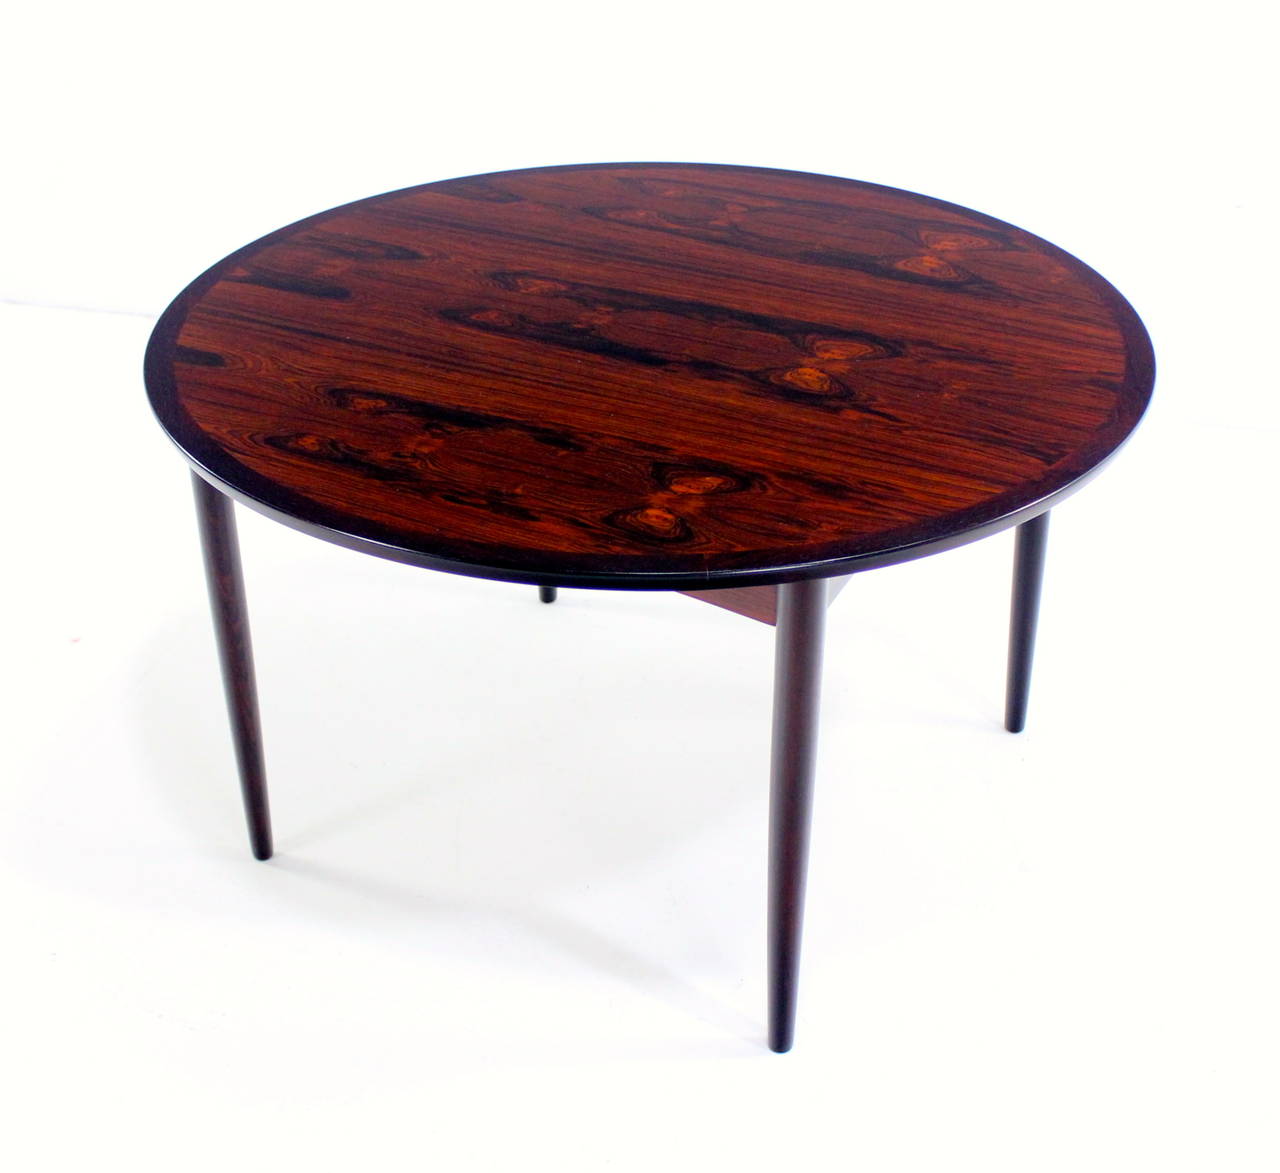 Danish modern cocktail or coffee table.
Mobelintarsia, maker.
Dramatic, richly flame grained rosewood.
Square inset base with tapered, round legs.
Professionally restored and refinished by LookModern.
Matchless quality and price.
Low freight /